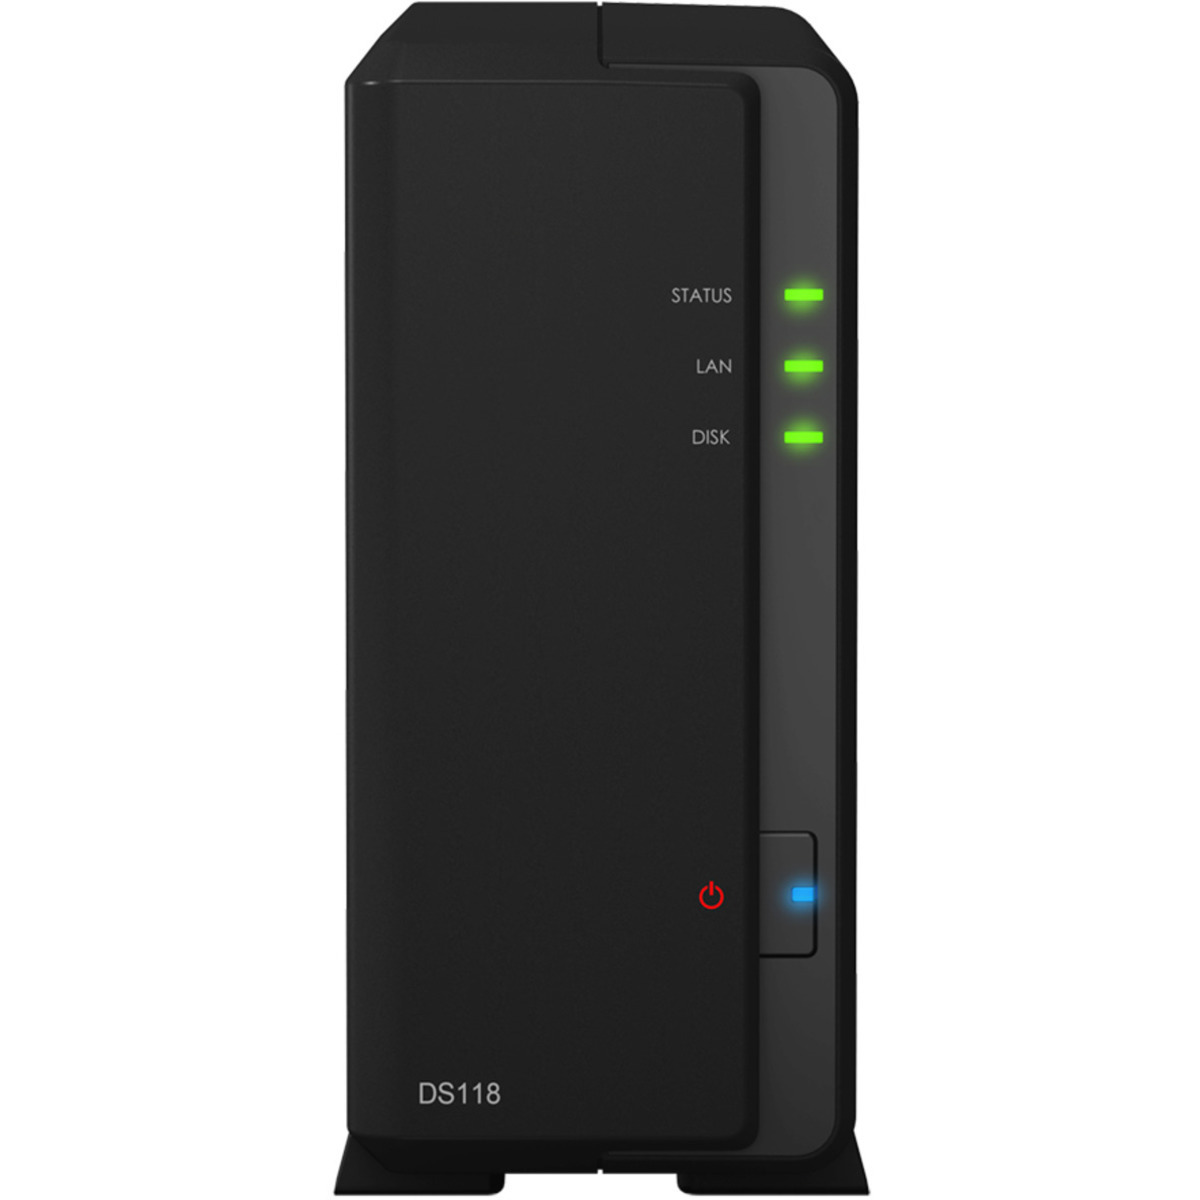 buy $545 Synology DiskStation DS118 2tb Desktop NAS - Network Attached Storage Device 1x2000gb Western Digital Red SA500 WDS200T1R0A 2.5 SATA 6Gb/s SSD NAS Class Drives Installed - Burn-In Tested - nas headquarters buy network attached storage server device das new raid-5 free shipping usa DiskStation DS118